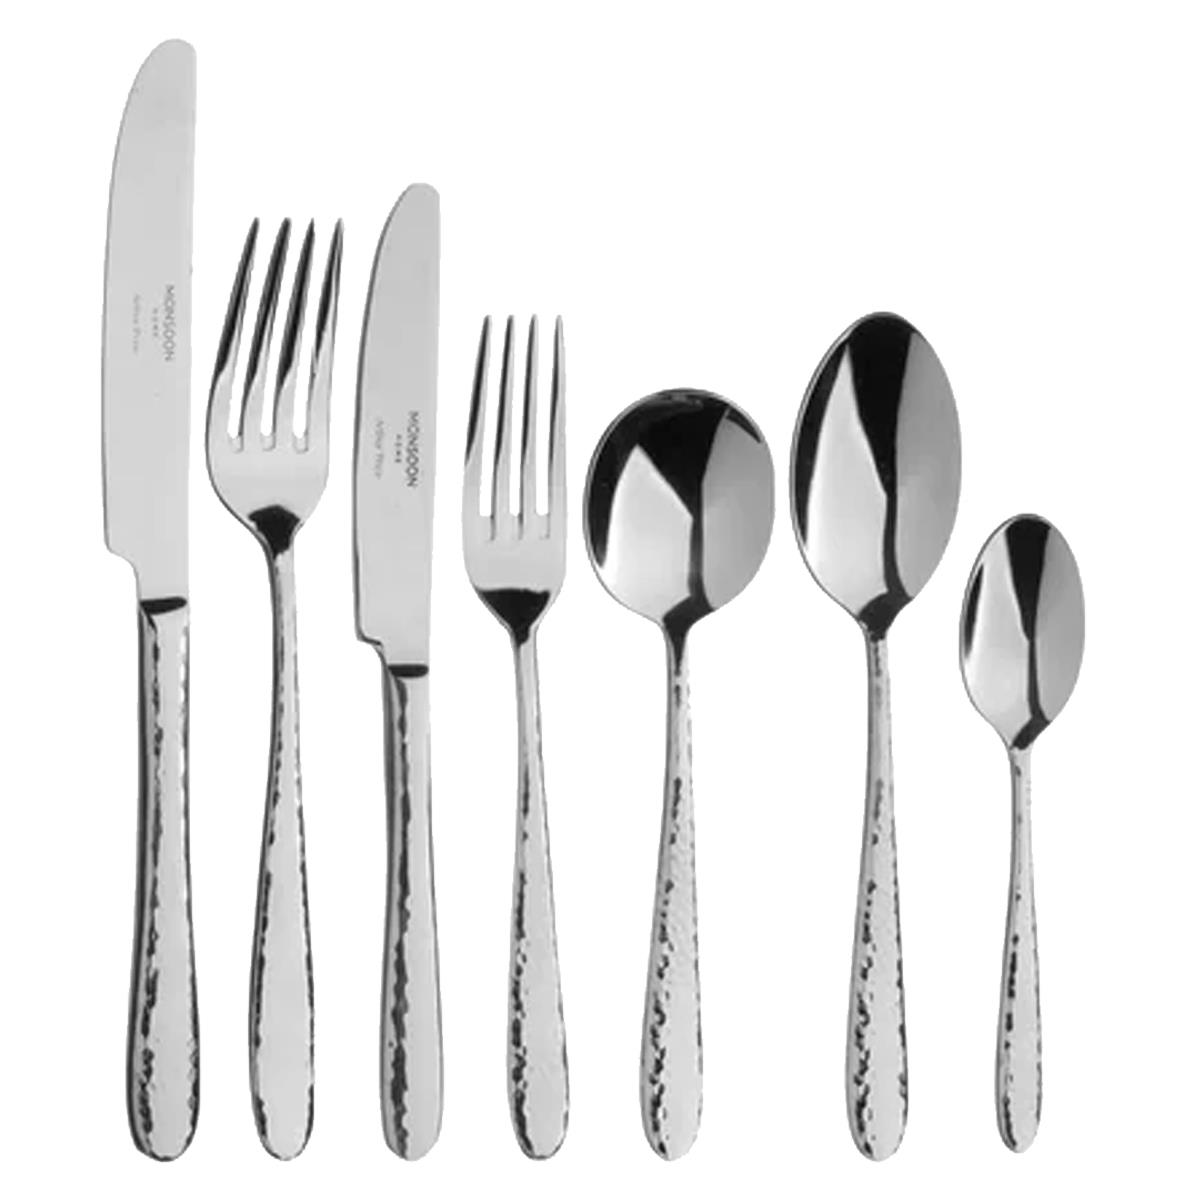 When is the Arthur Price Monsoon Mirage Design Cutlery expected to be restocked?